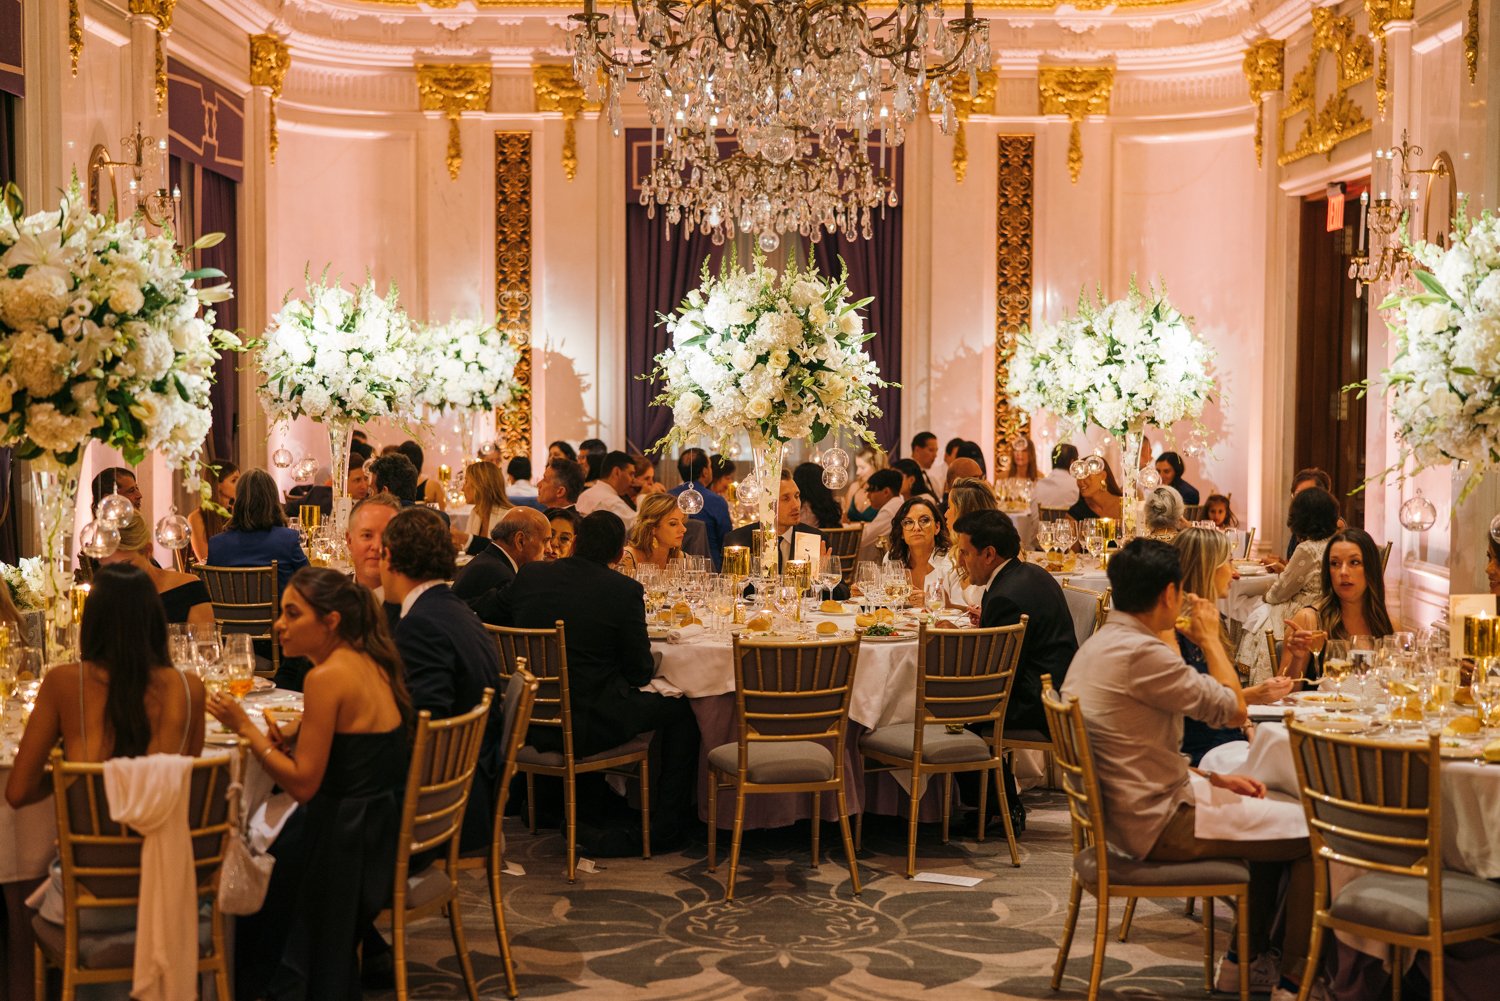 In the St. Regis in Manhattan, there are white floral bouquets above tables full of seated wedding guests.

Manhattan Luxury Wedding. New York Luxury Wedding Photographer. Wedding in Manhattan. NYC Luxury Wedding.